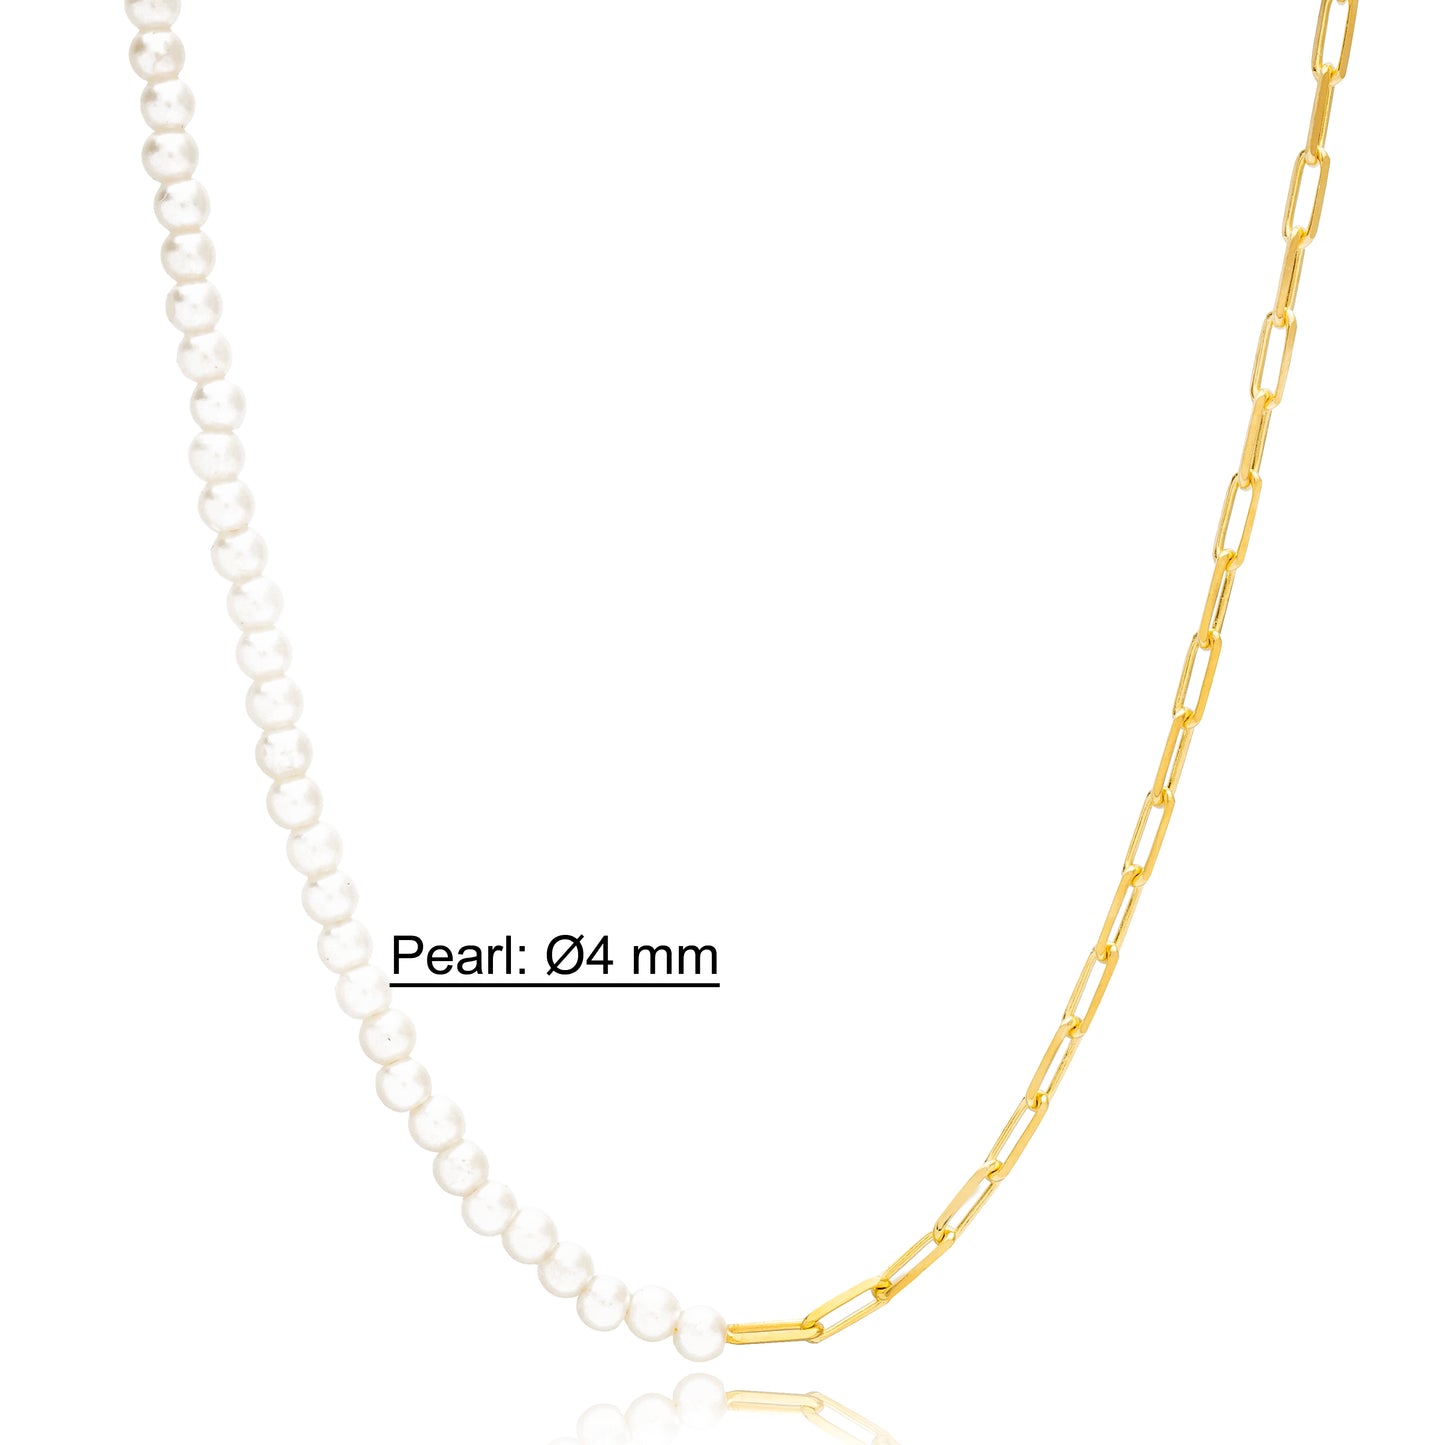 Half Chain and Half Pearls Necklace